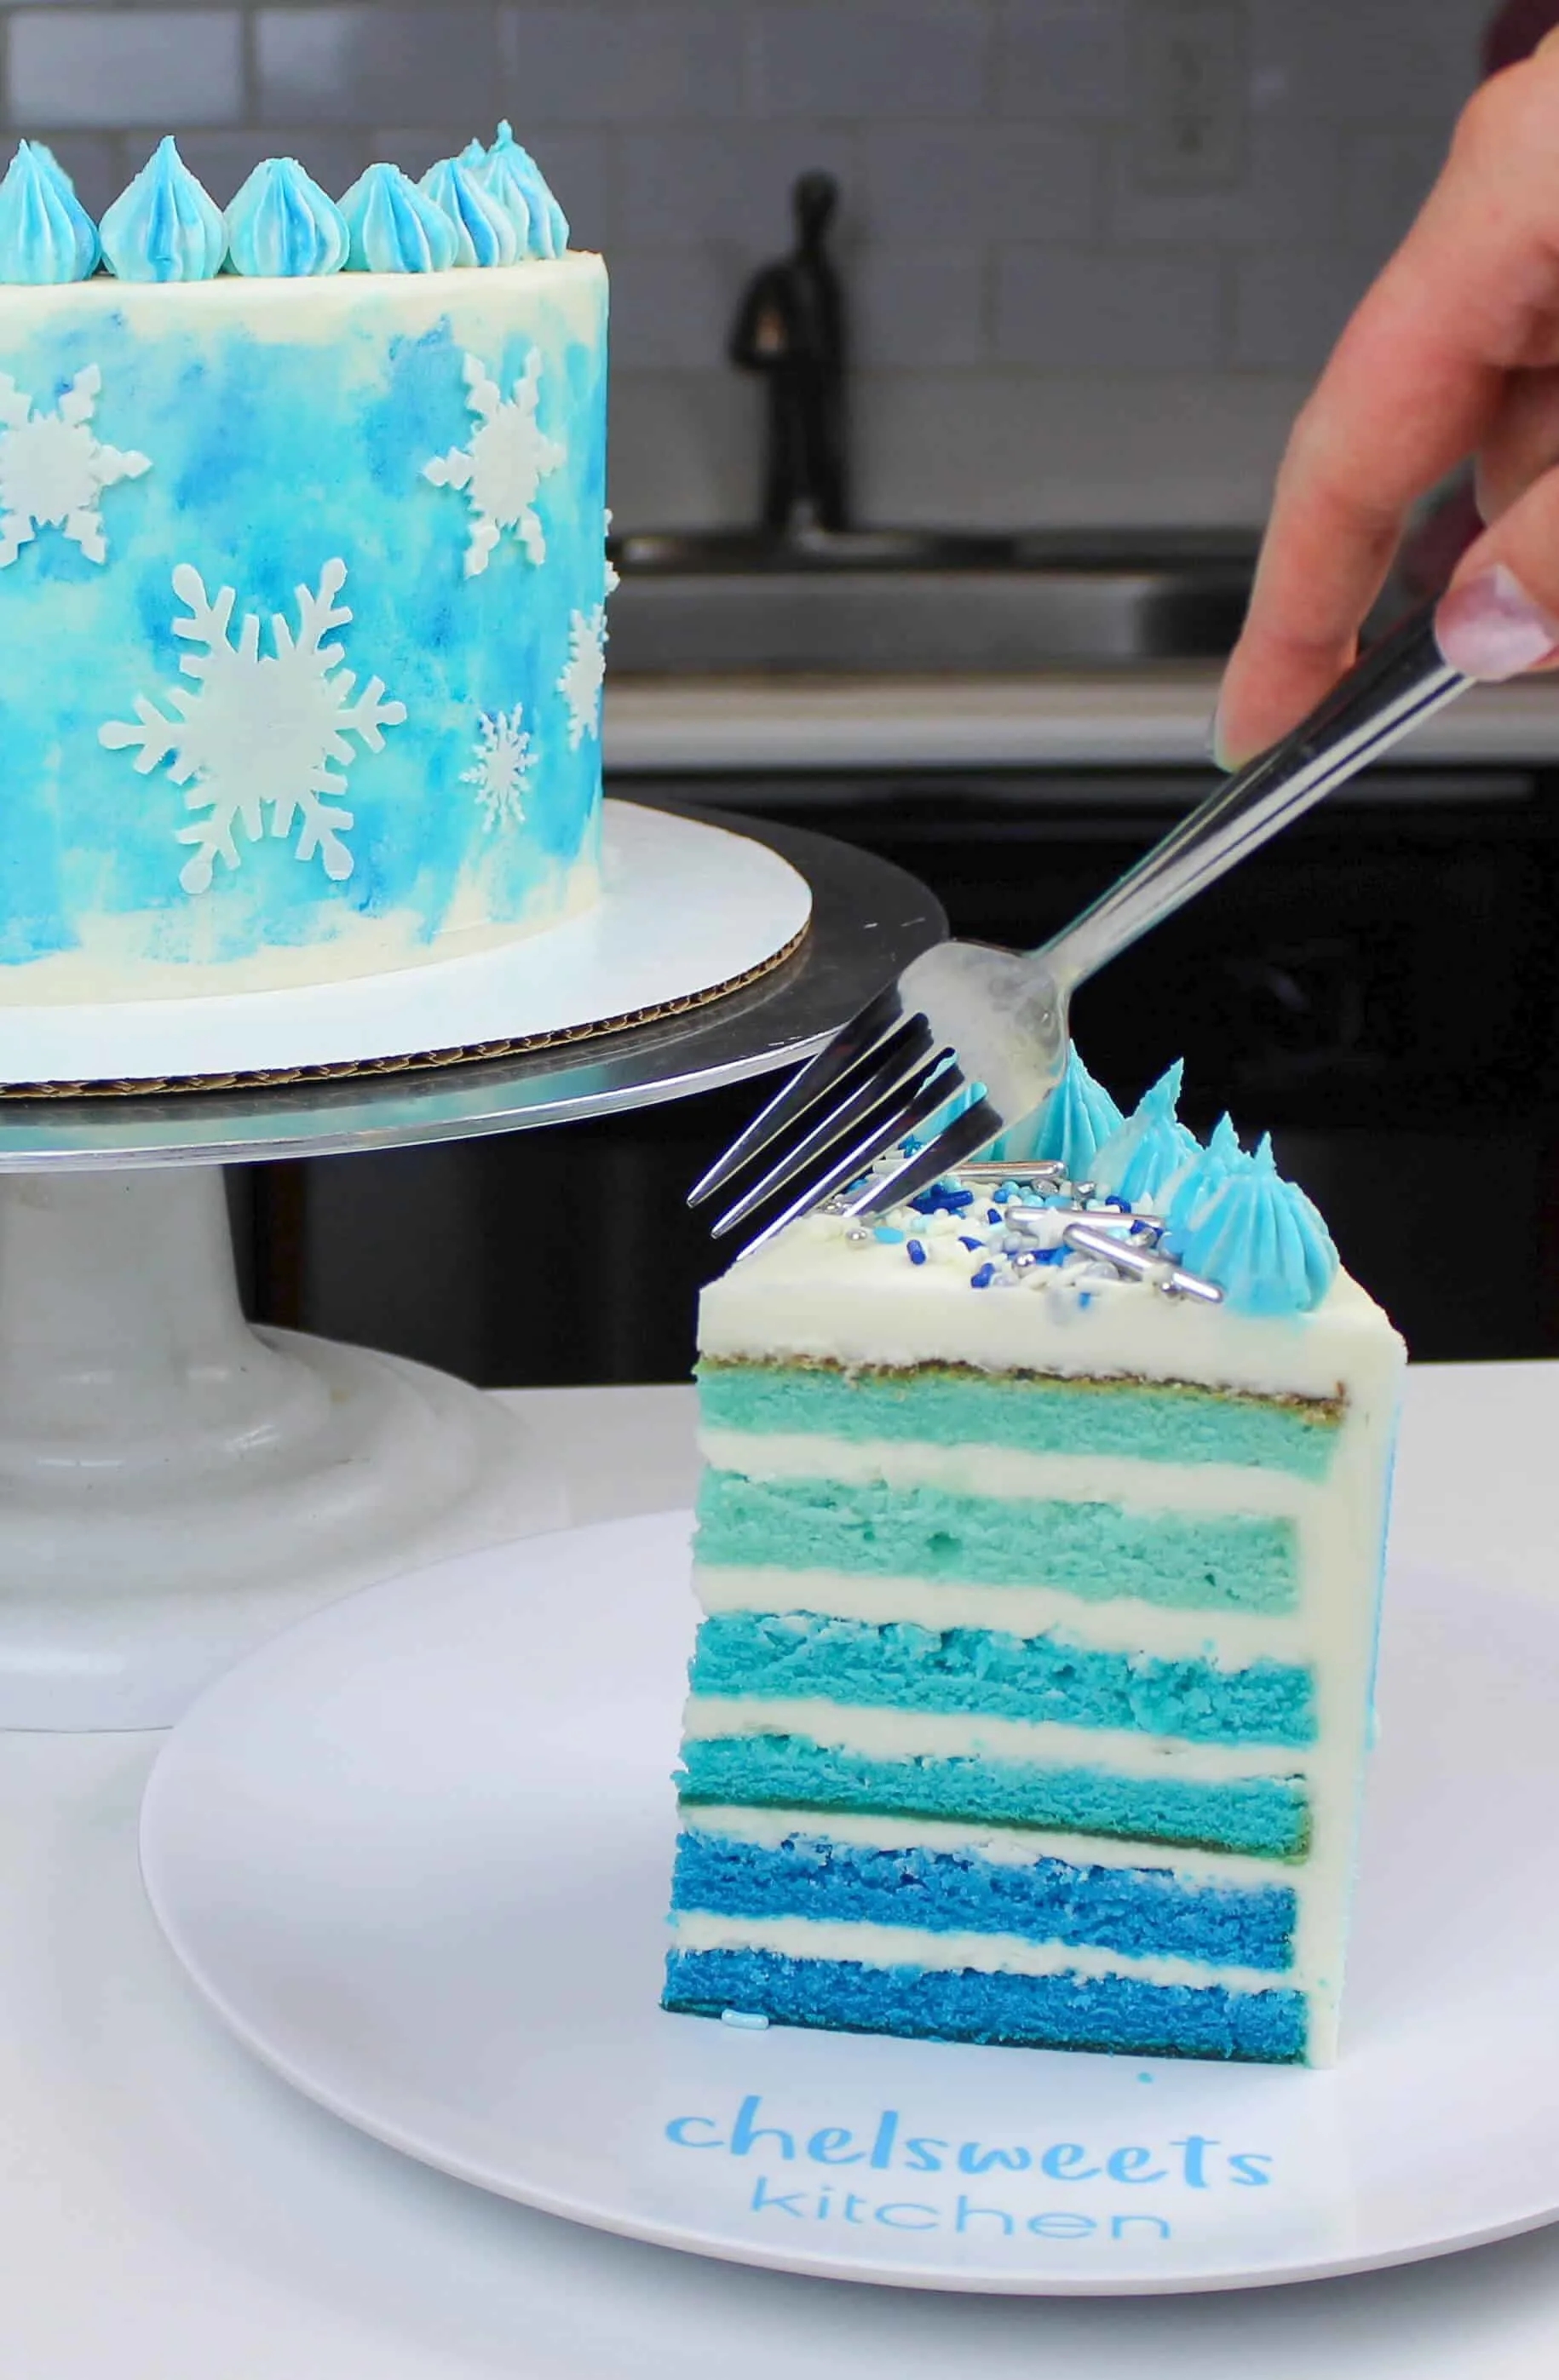 The perfect winter cake! An ombre blue cake decorated with buttercream snowflakes